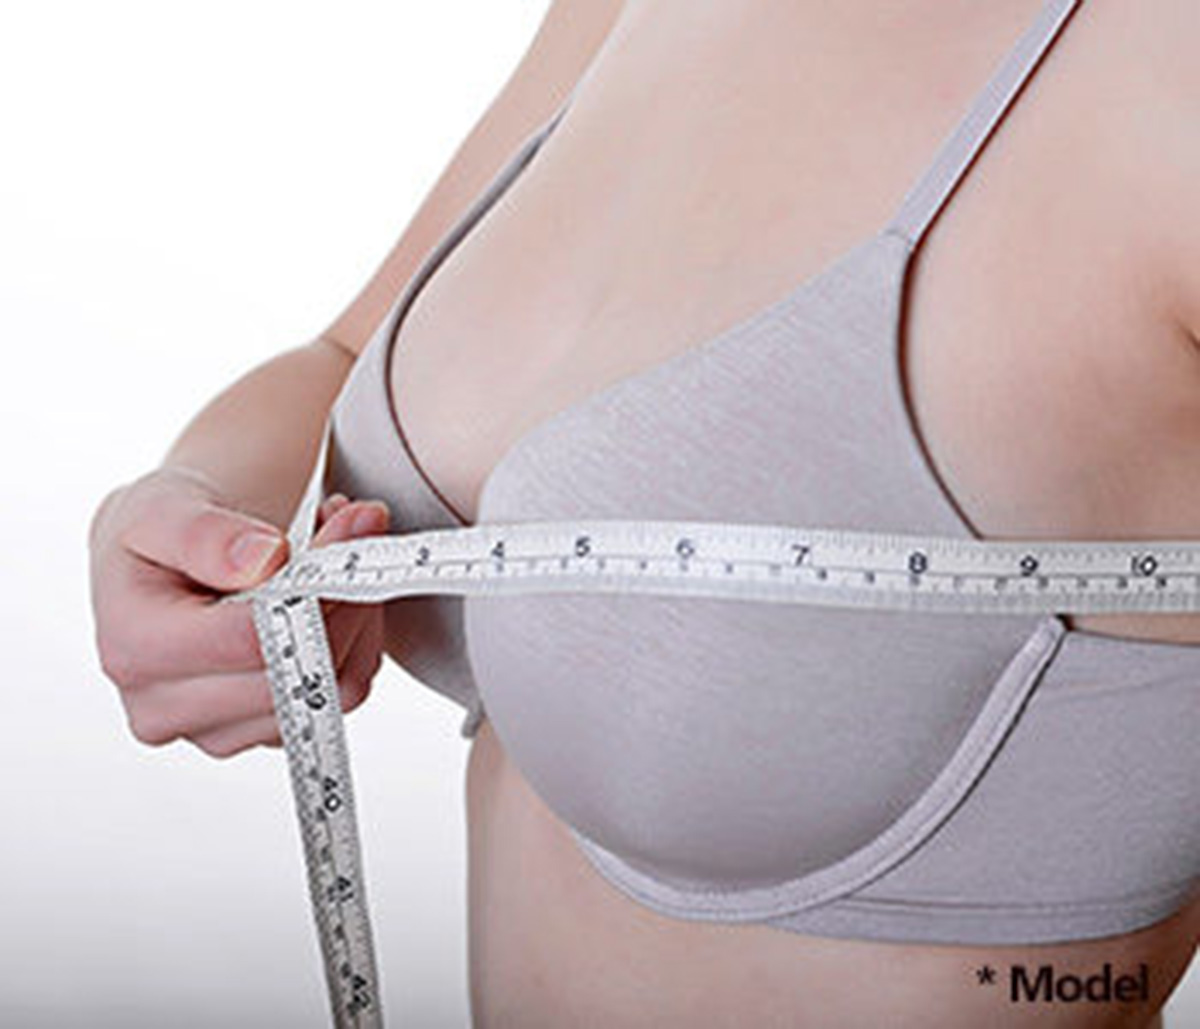 Dr. Dass describes Breast Augmentation revisions in Los Angeles